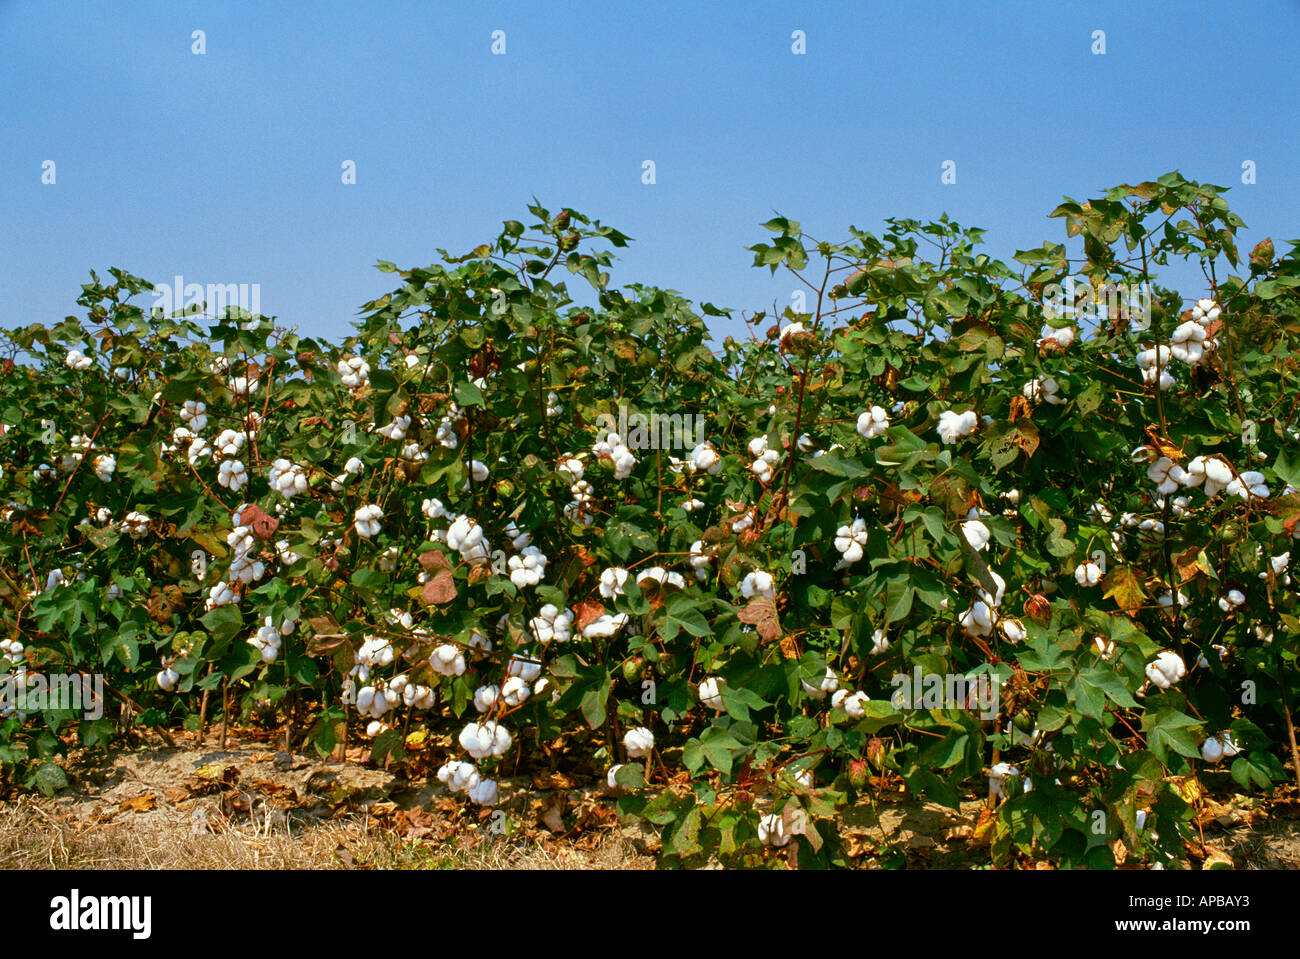 Agriculture - Side view of mature cotton plants with open bolls at the defoliation stage / Mississippi, USA. Stock Photo